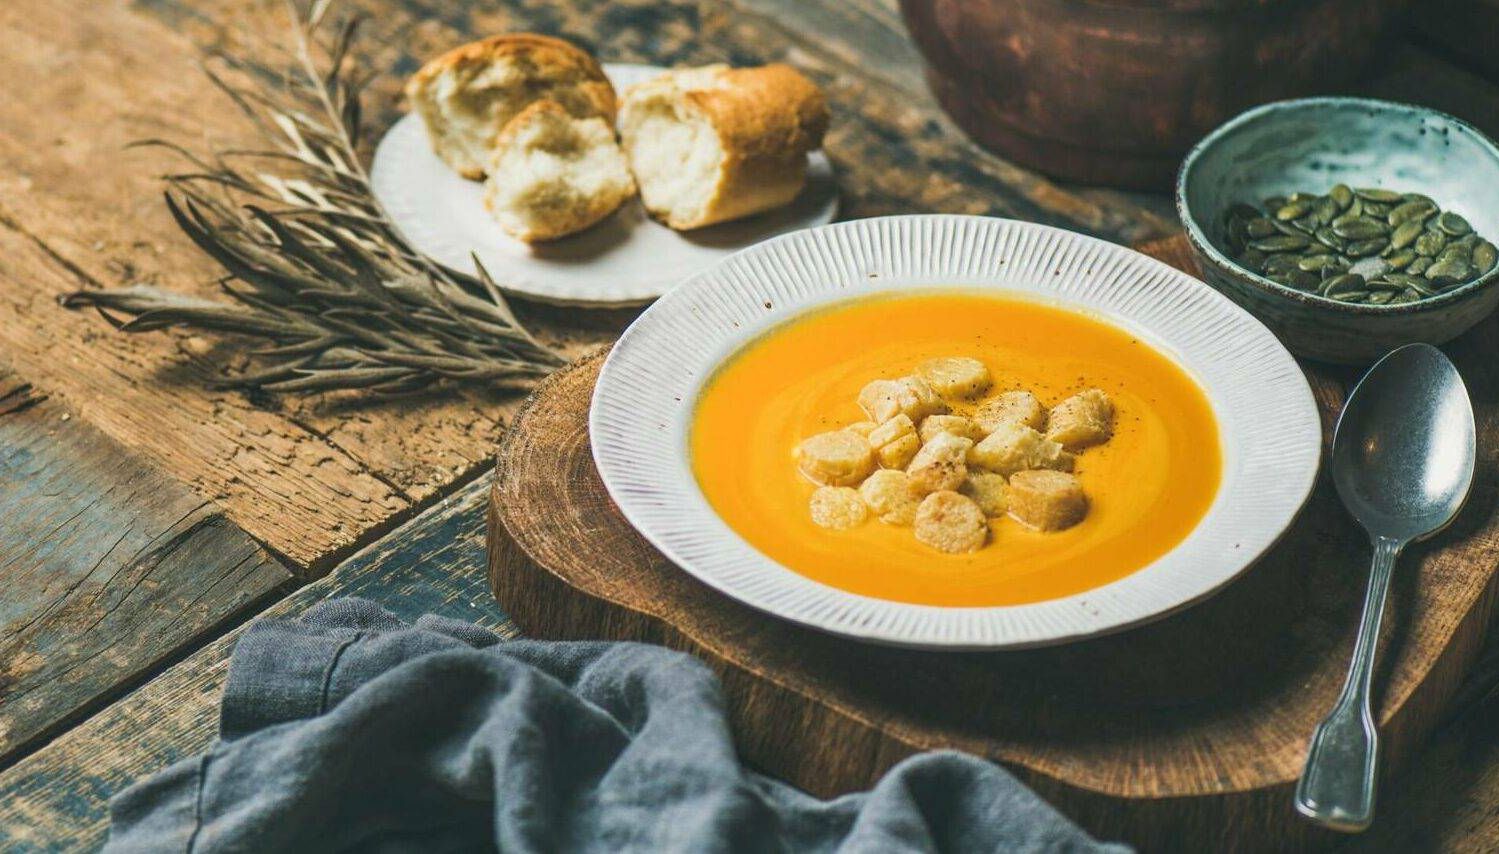 Fall warming pumpkin cream soup with croutons and seeds on board over rustic wooden background, copy space, wide composition. Autumn vegetarian, vegan, healthy comfort food concept. Rewire PBS Living Comfort Foods